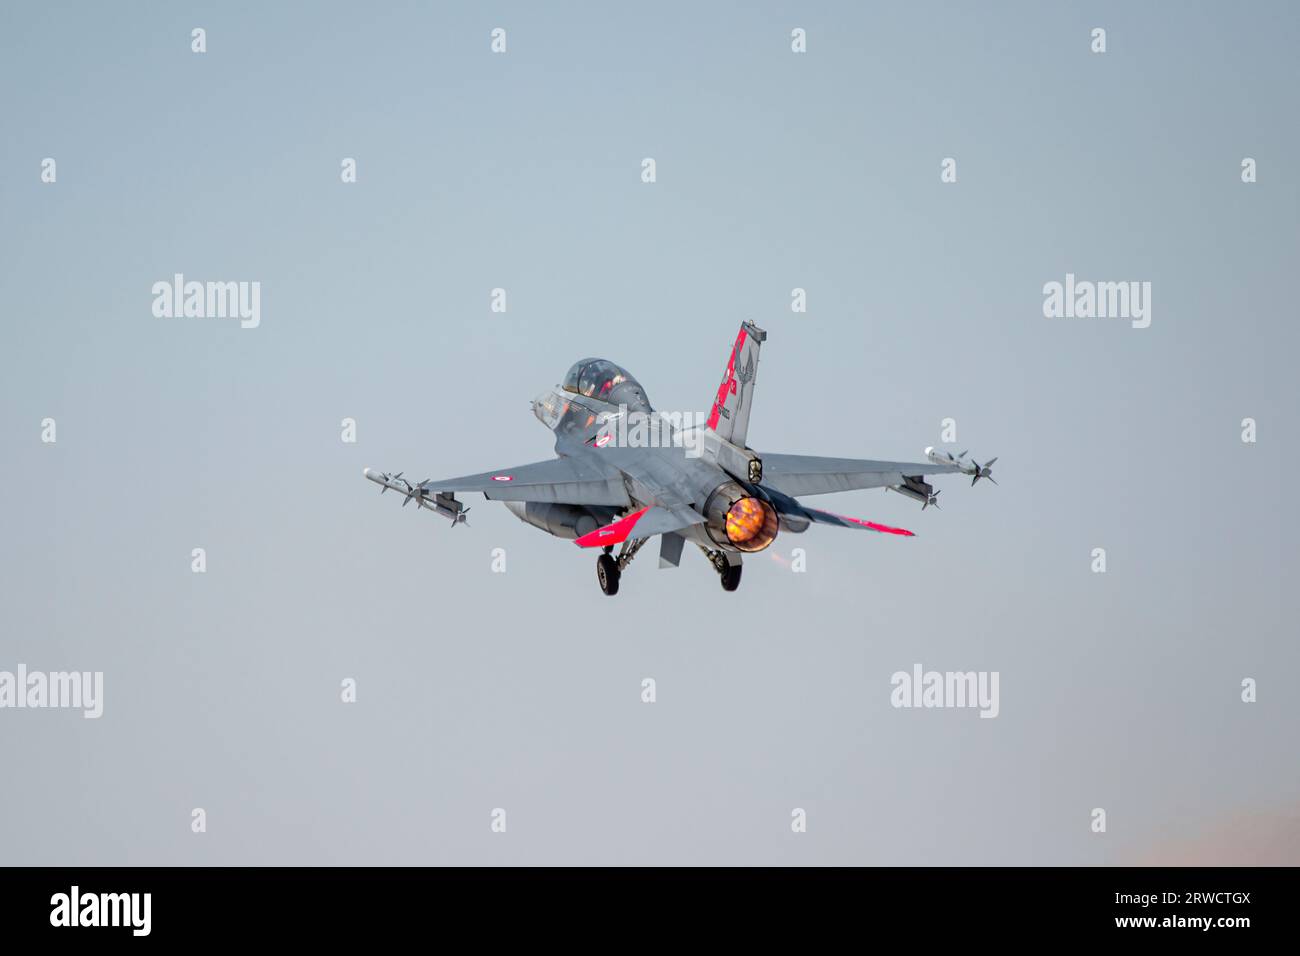 Konya, Turkey - 07 01 2021: Anatolian Eagle Air Force Exercise 2021 2 F16 fighter jets taxi in Turkey as Turkish Stars aerobatic team passes through t Stock Photo